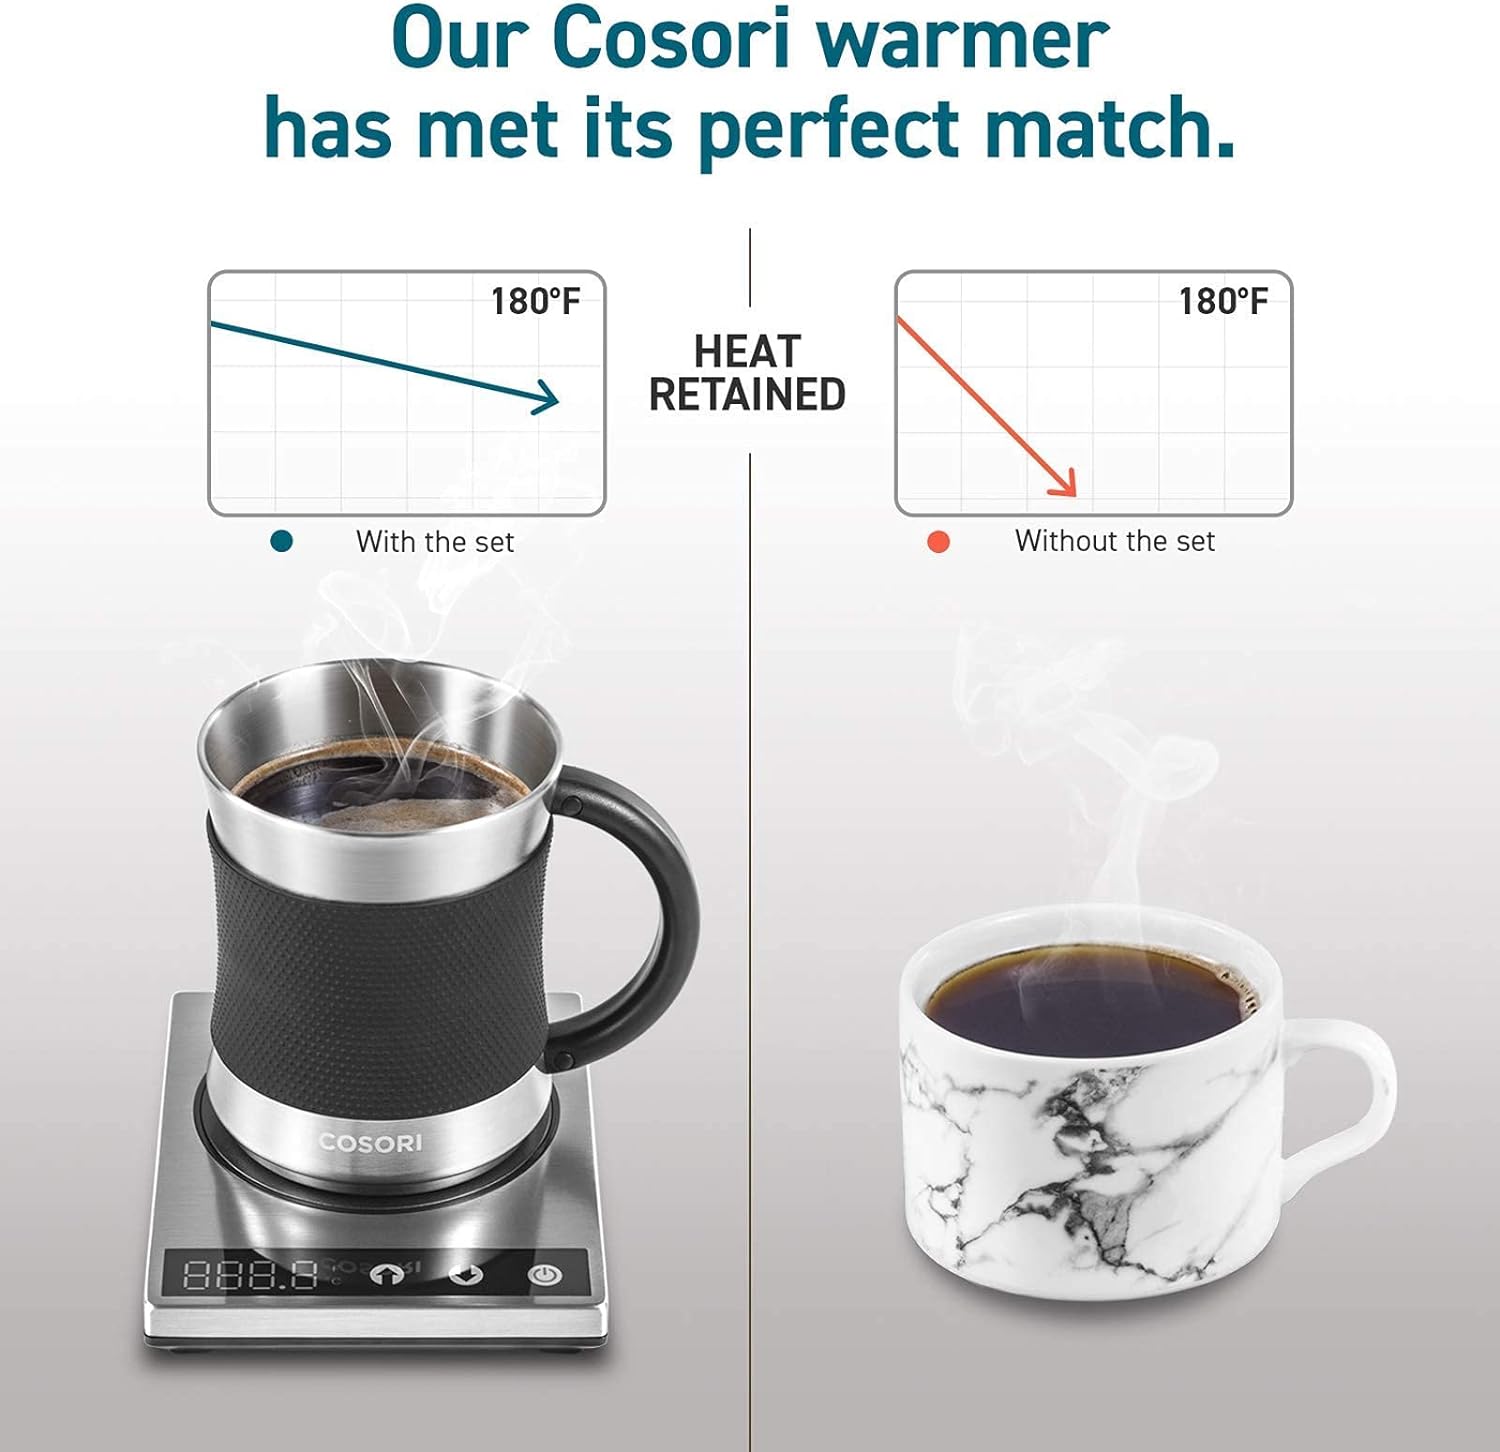 COSORI Coffee Mug Warmer  Mug Set for Desk, Cup Heater, Office  Christmas Gifts, 1°F Precise Temperature Control, Touch Tech  LCD Digital Display (77-194℉), 304 Stainless Steel, Silver/Black